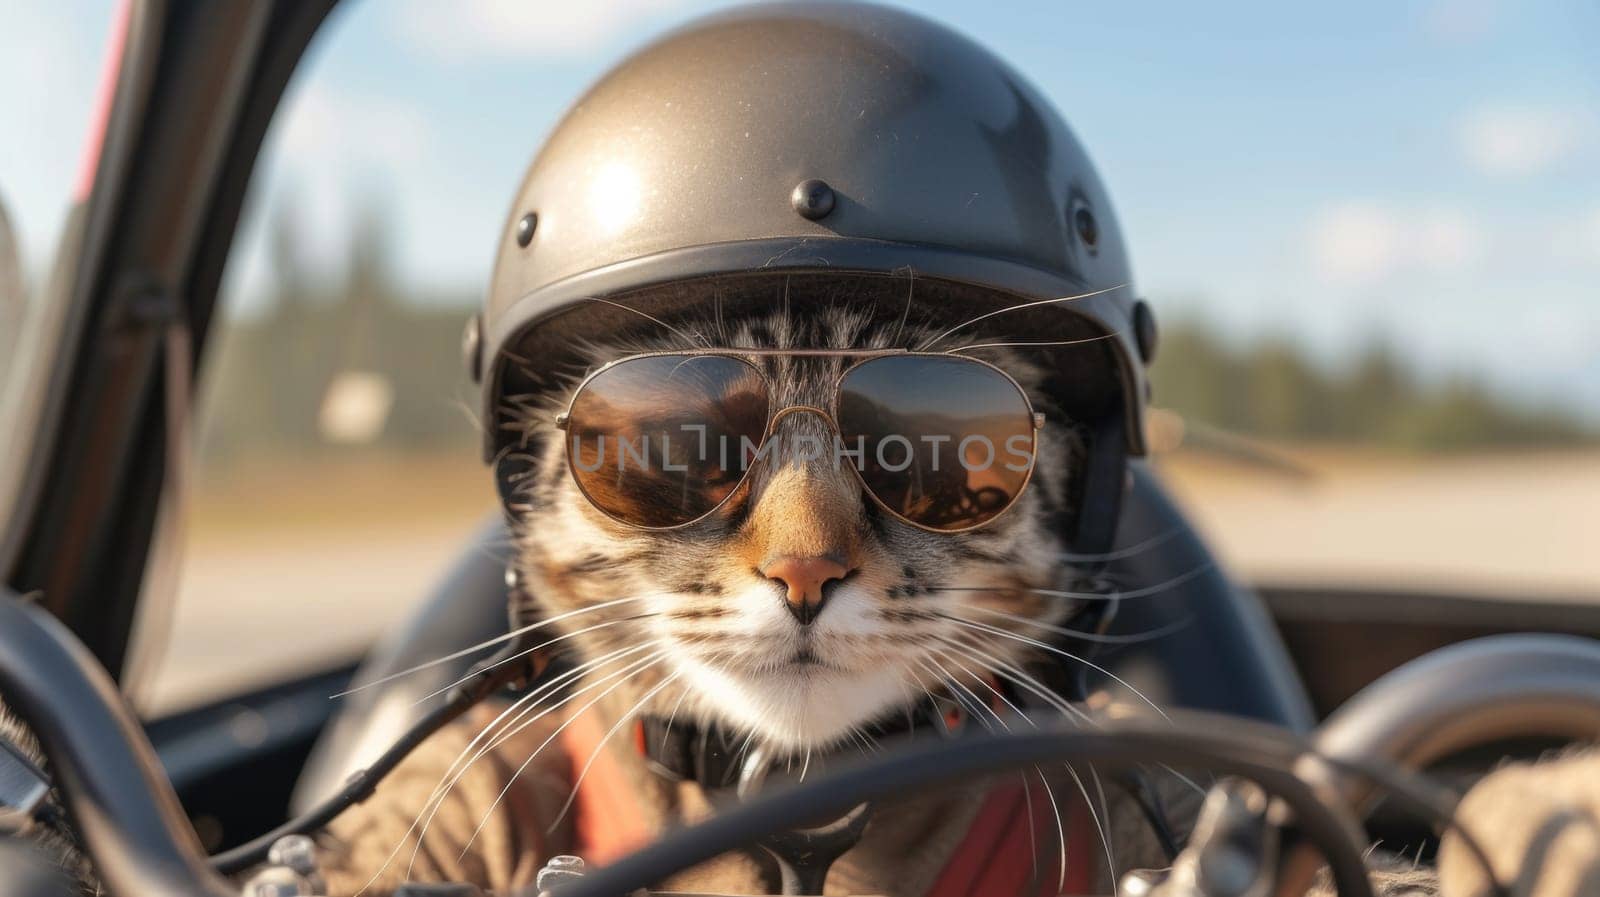 A cat wearing sunglasses and a helmet driving in the car